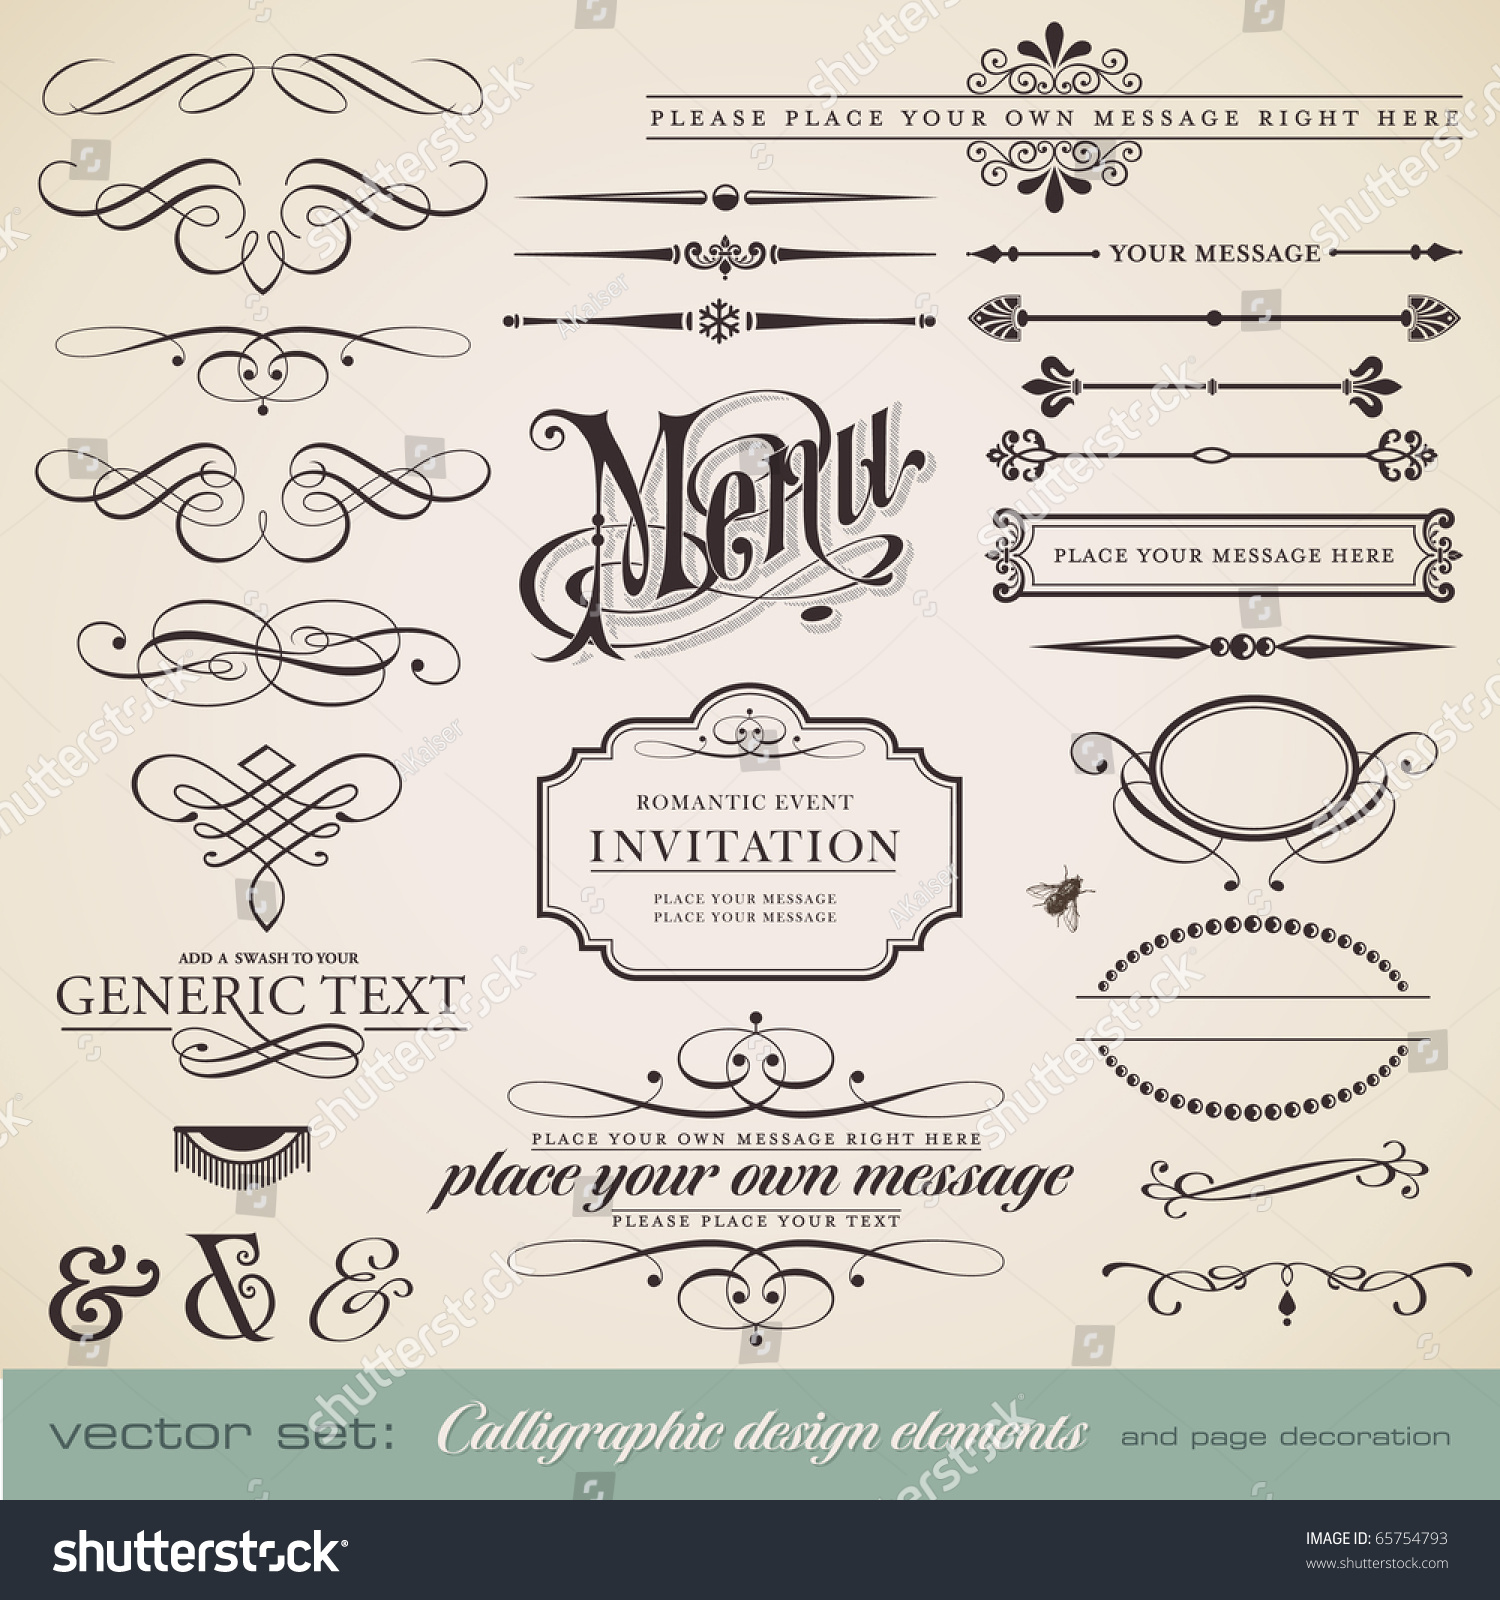 vector set: calligraphic design elements and page decoration - lots of useful elements to embellish your layout #65754793